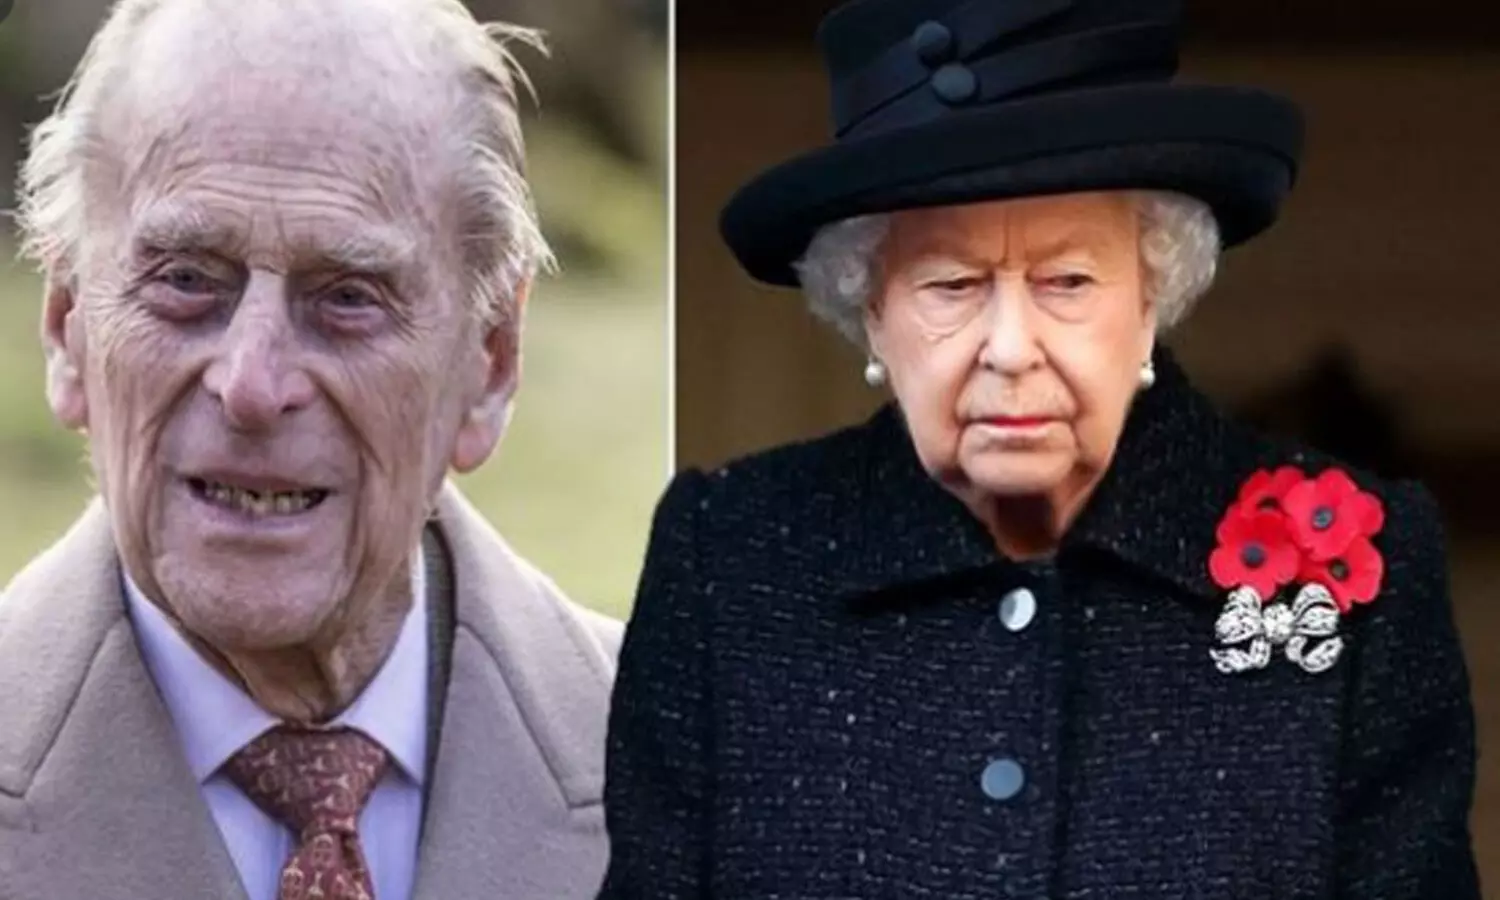 Prince Philip death mourning over; Who will be next Queen after Elizabeth?